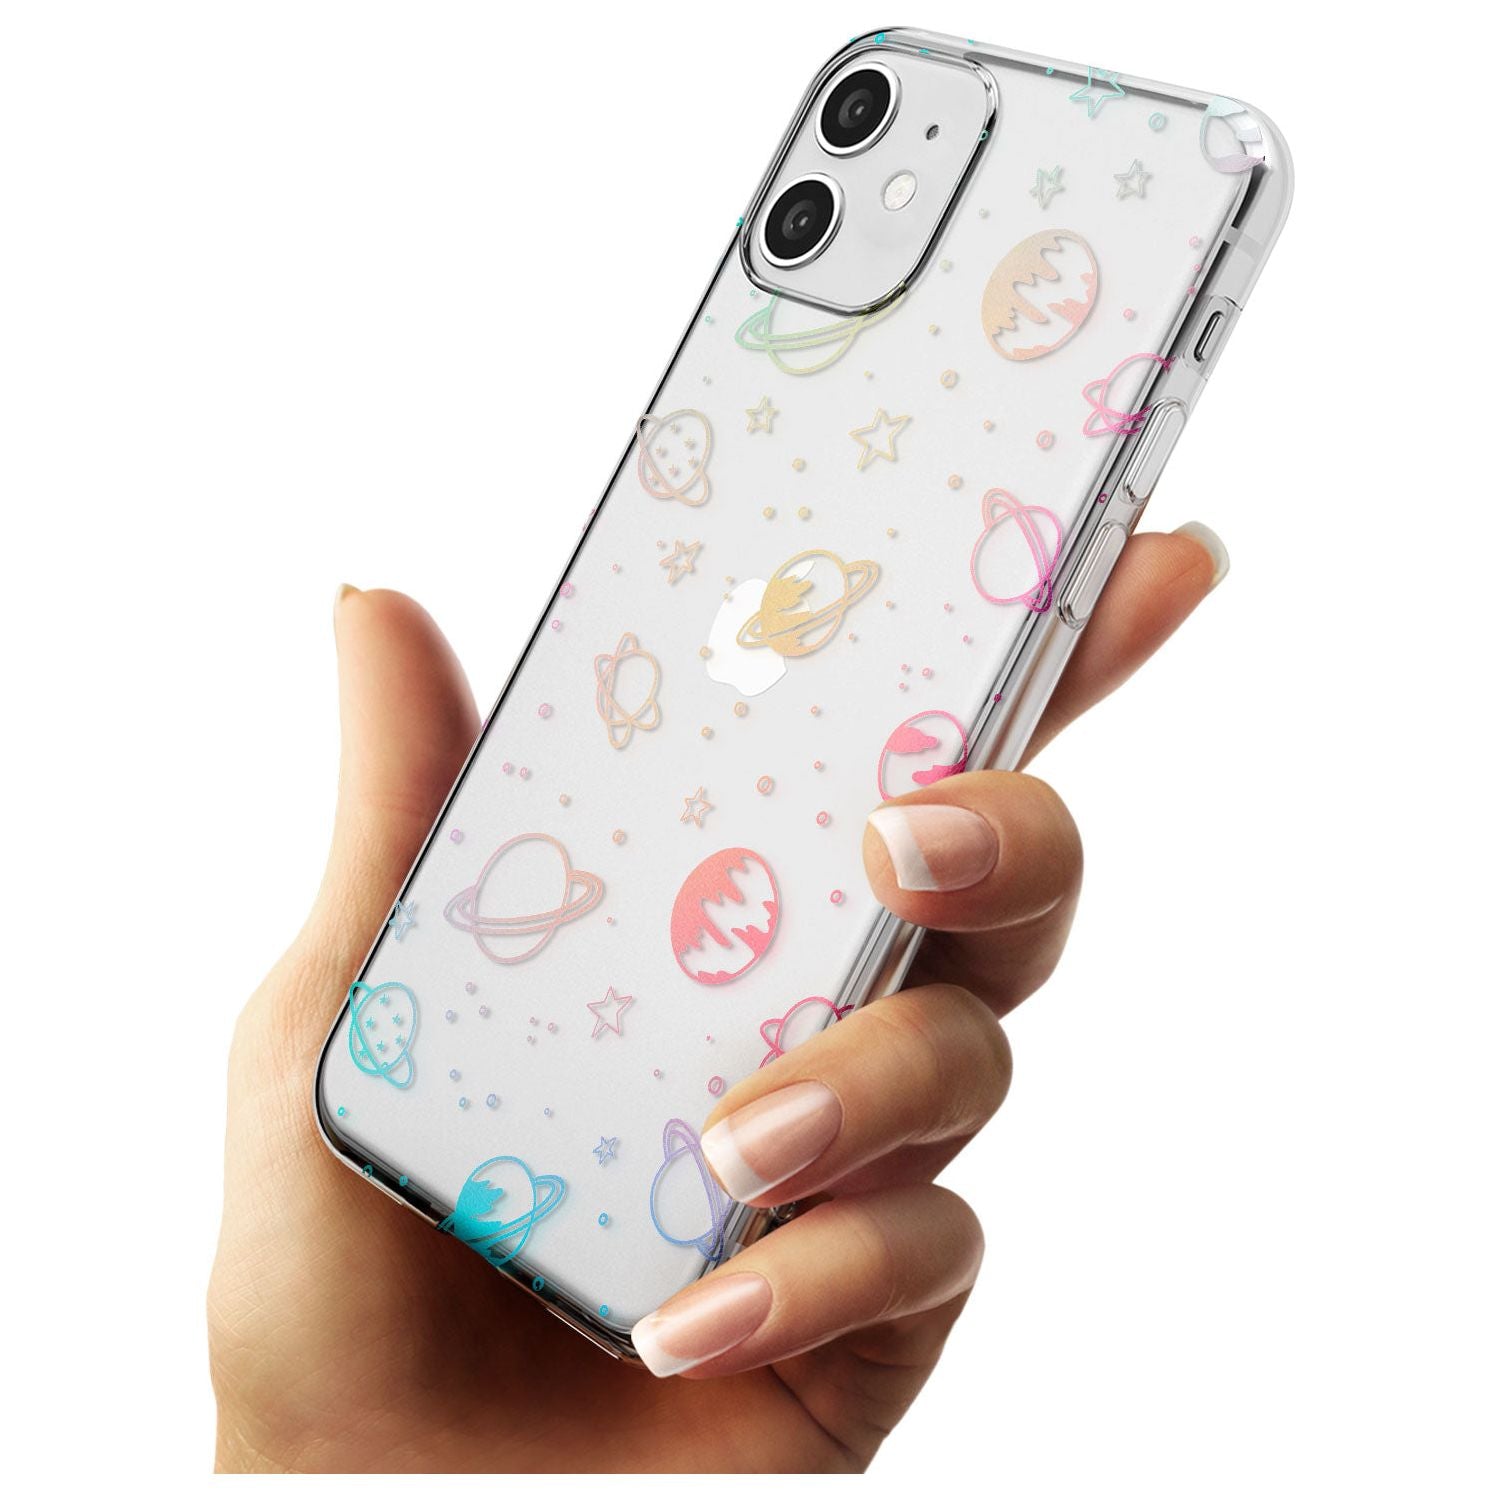 Outer Space Outlines: Pastels on Clear Black Impact Phone Case for iPhone 11